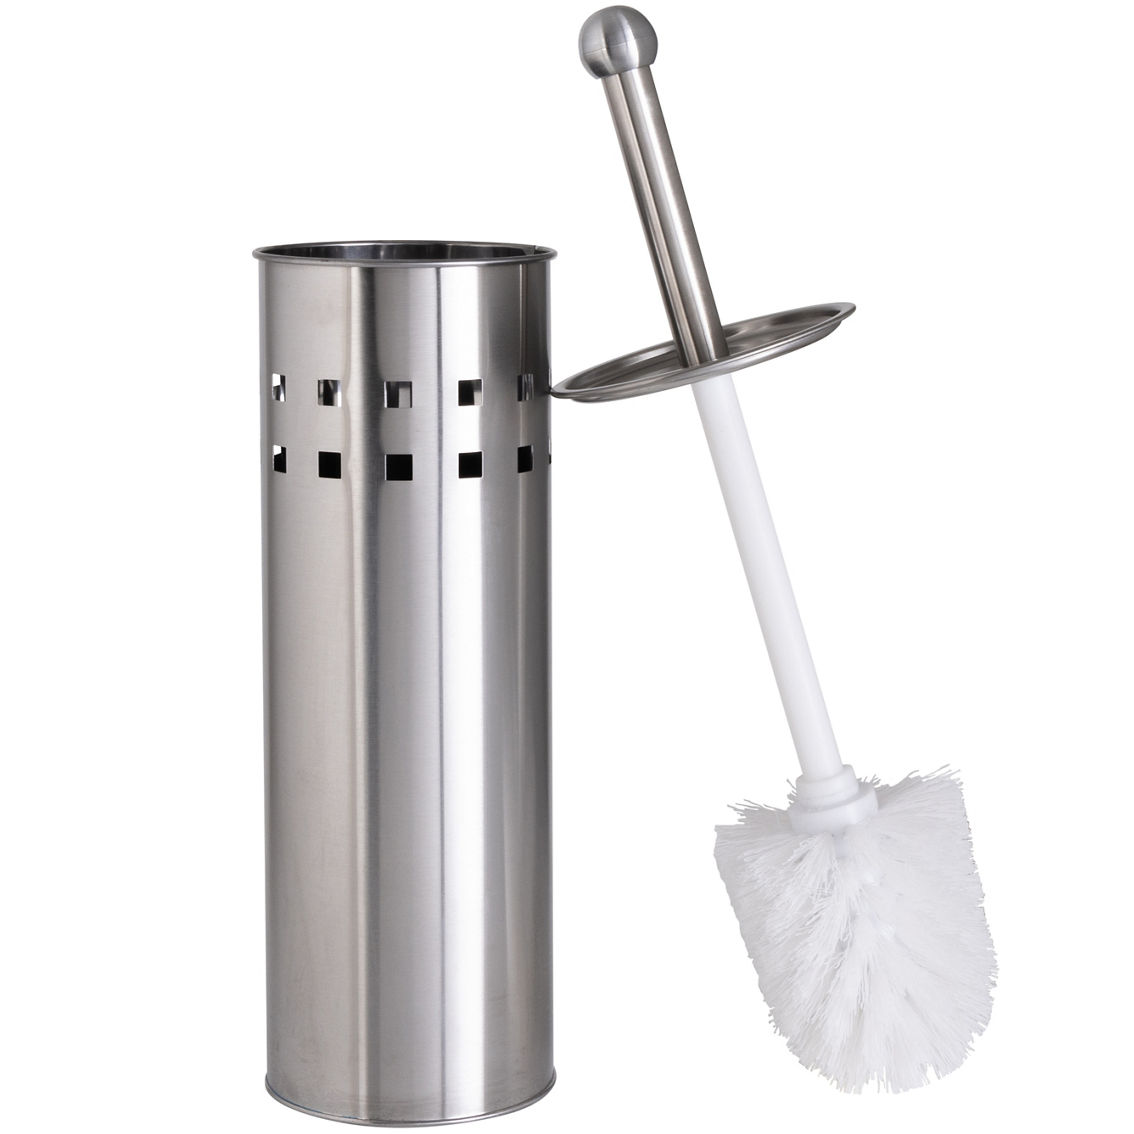 Bath Bliss Stainless Steel Toilet Brush and Air Vent Holder Set - Image 2 of 5